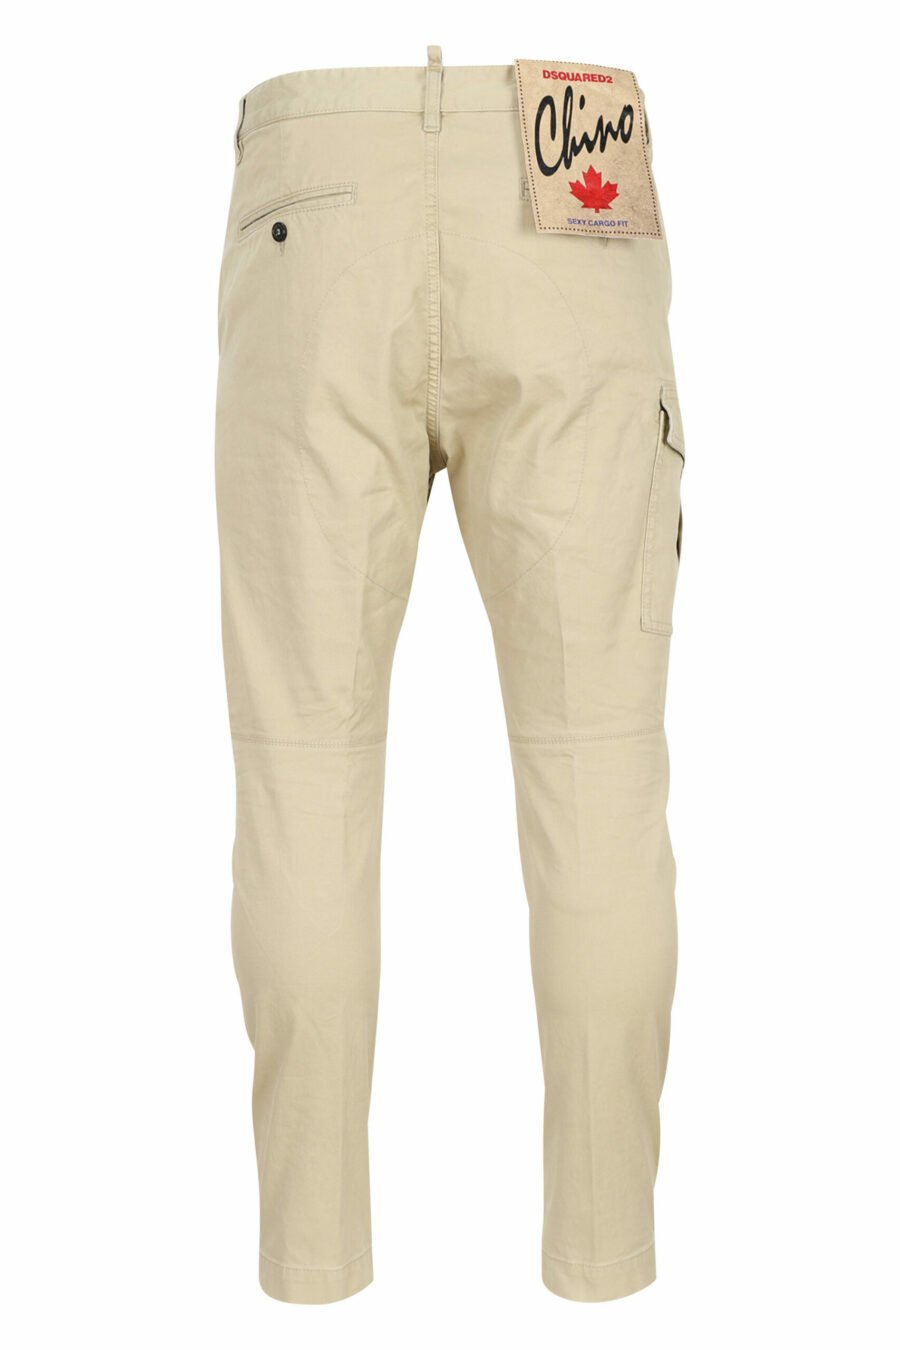 Beige sexy cargo trousers with side pockets - 8052134973615 2 scaled